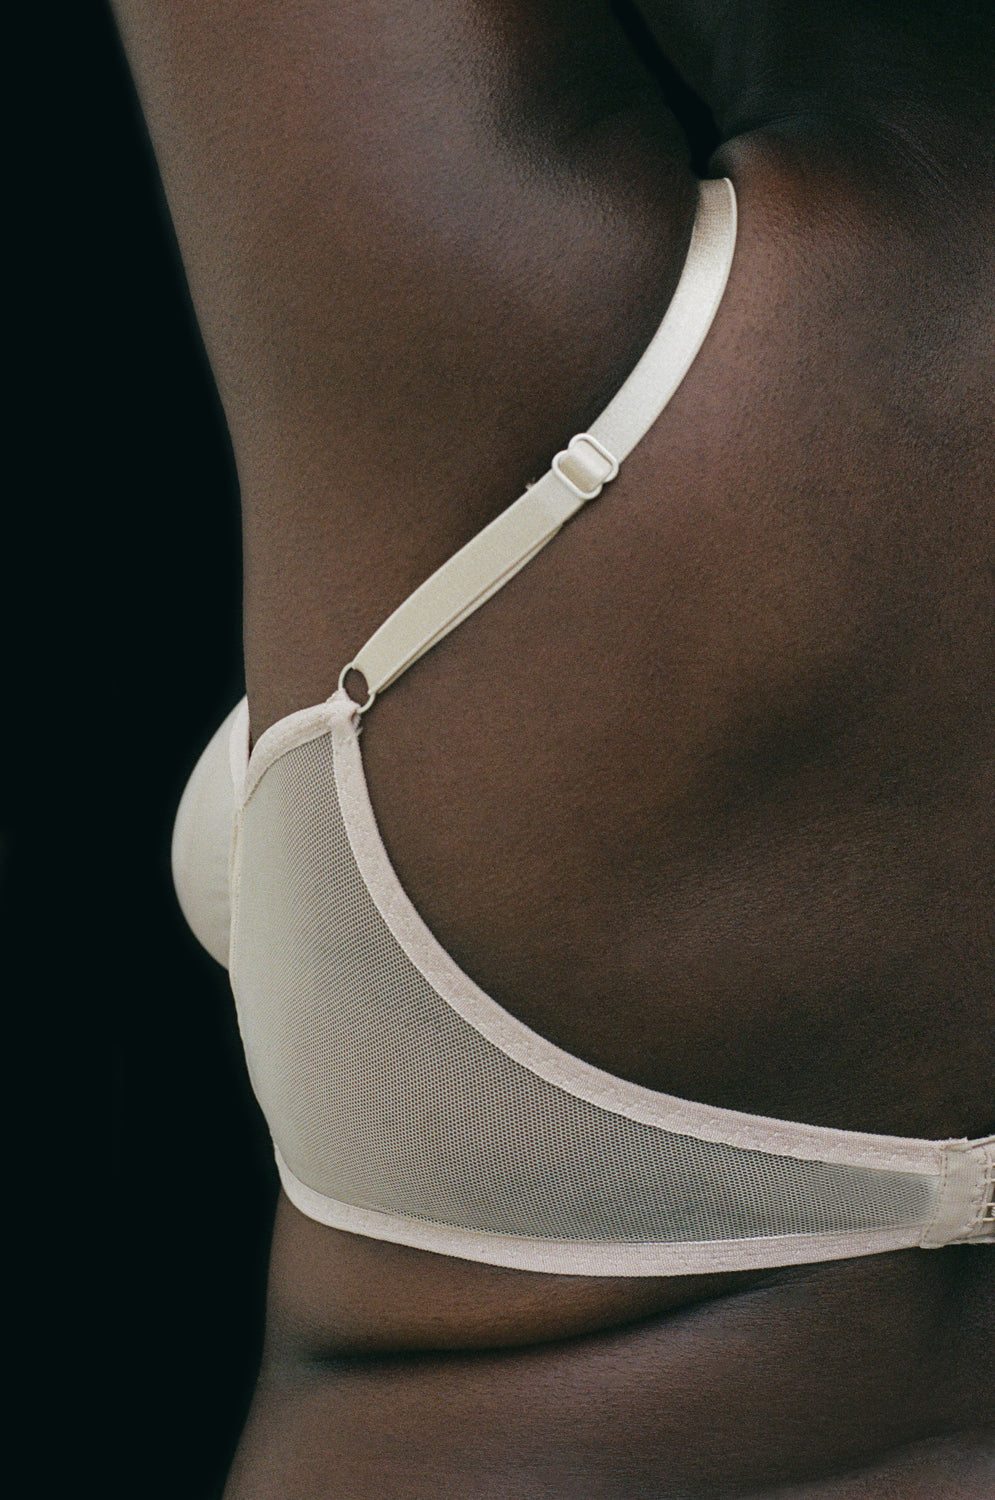 A view of the back of the Kye Intimates Form Bra in the color ecru. This bra offers the perfect balance between structure and comfort. This sheer bra is wire free, with adjustable shoulder straps and an adjustable back clasp. This wire free v neck bra provides moderate support, and is comfortable yet feminine.